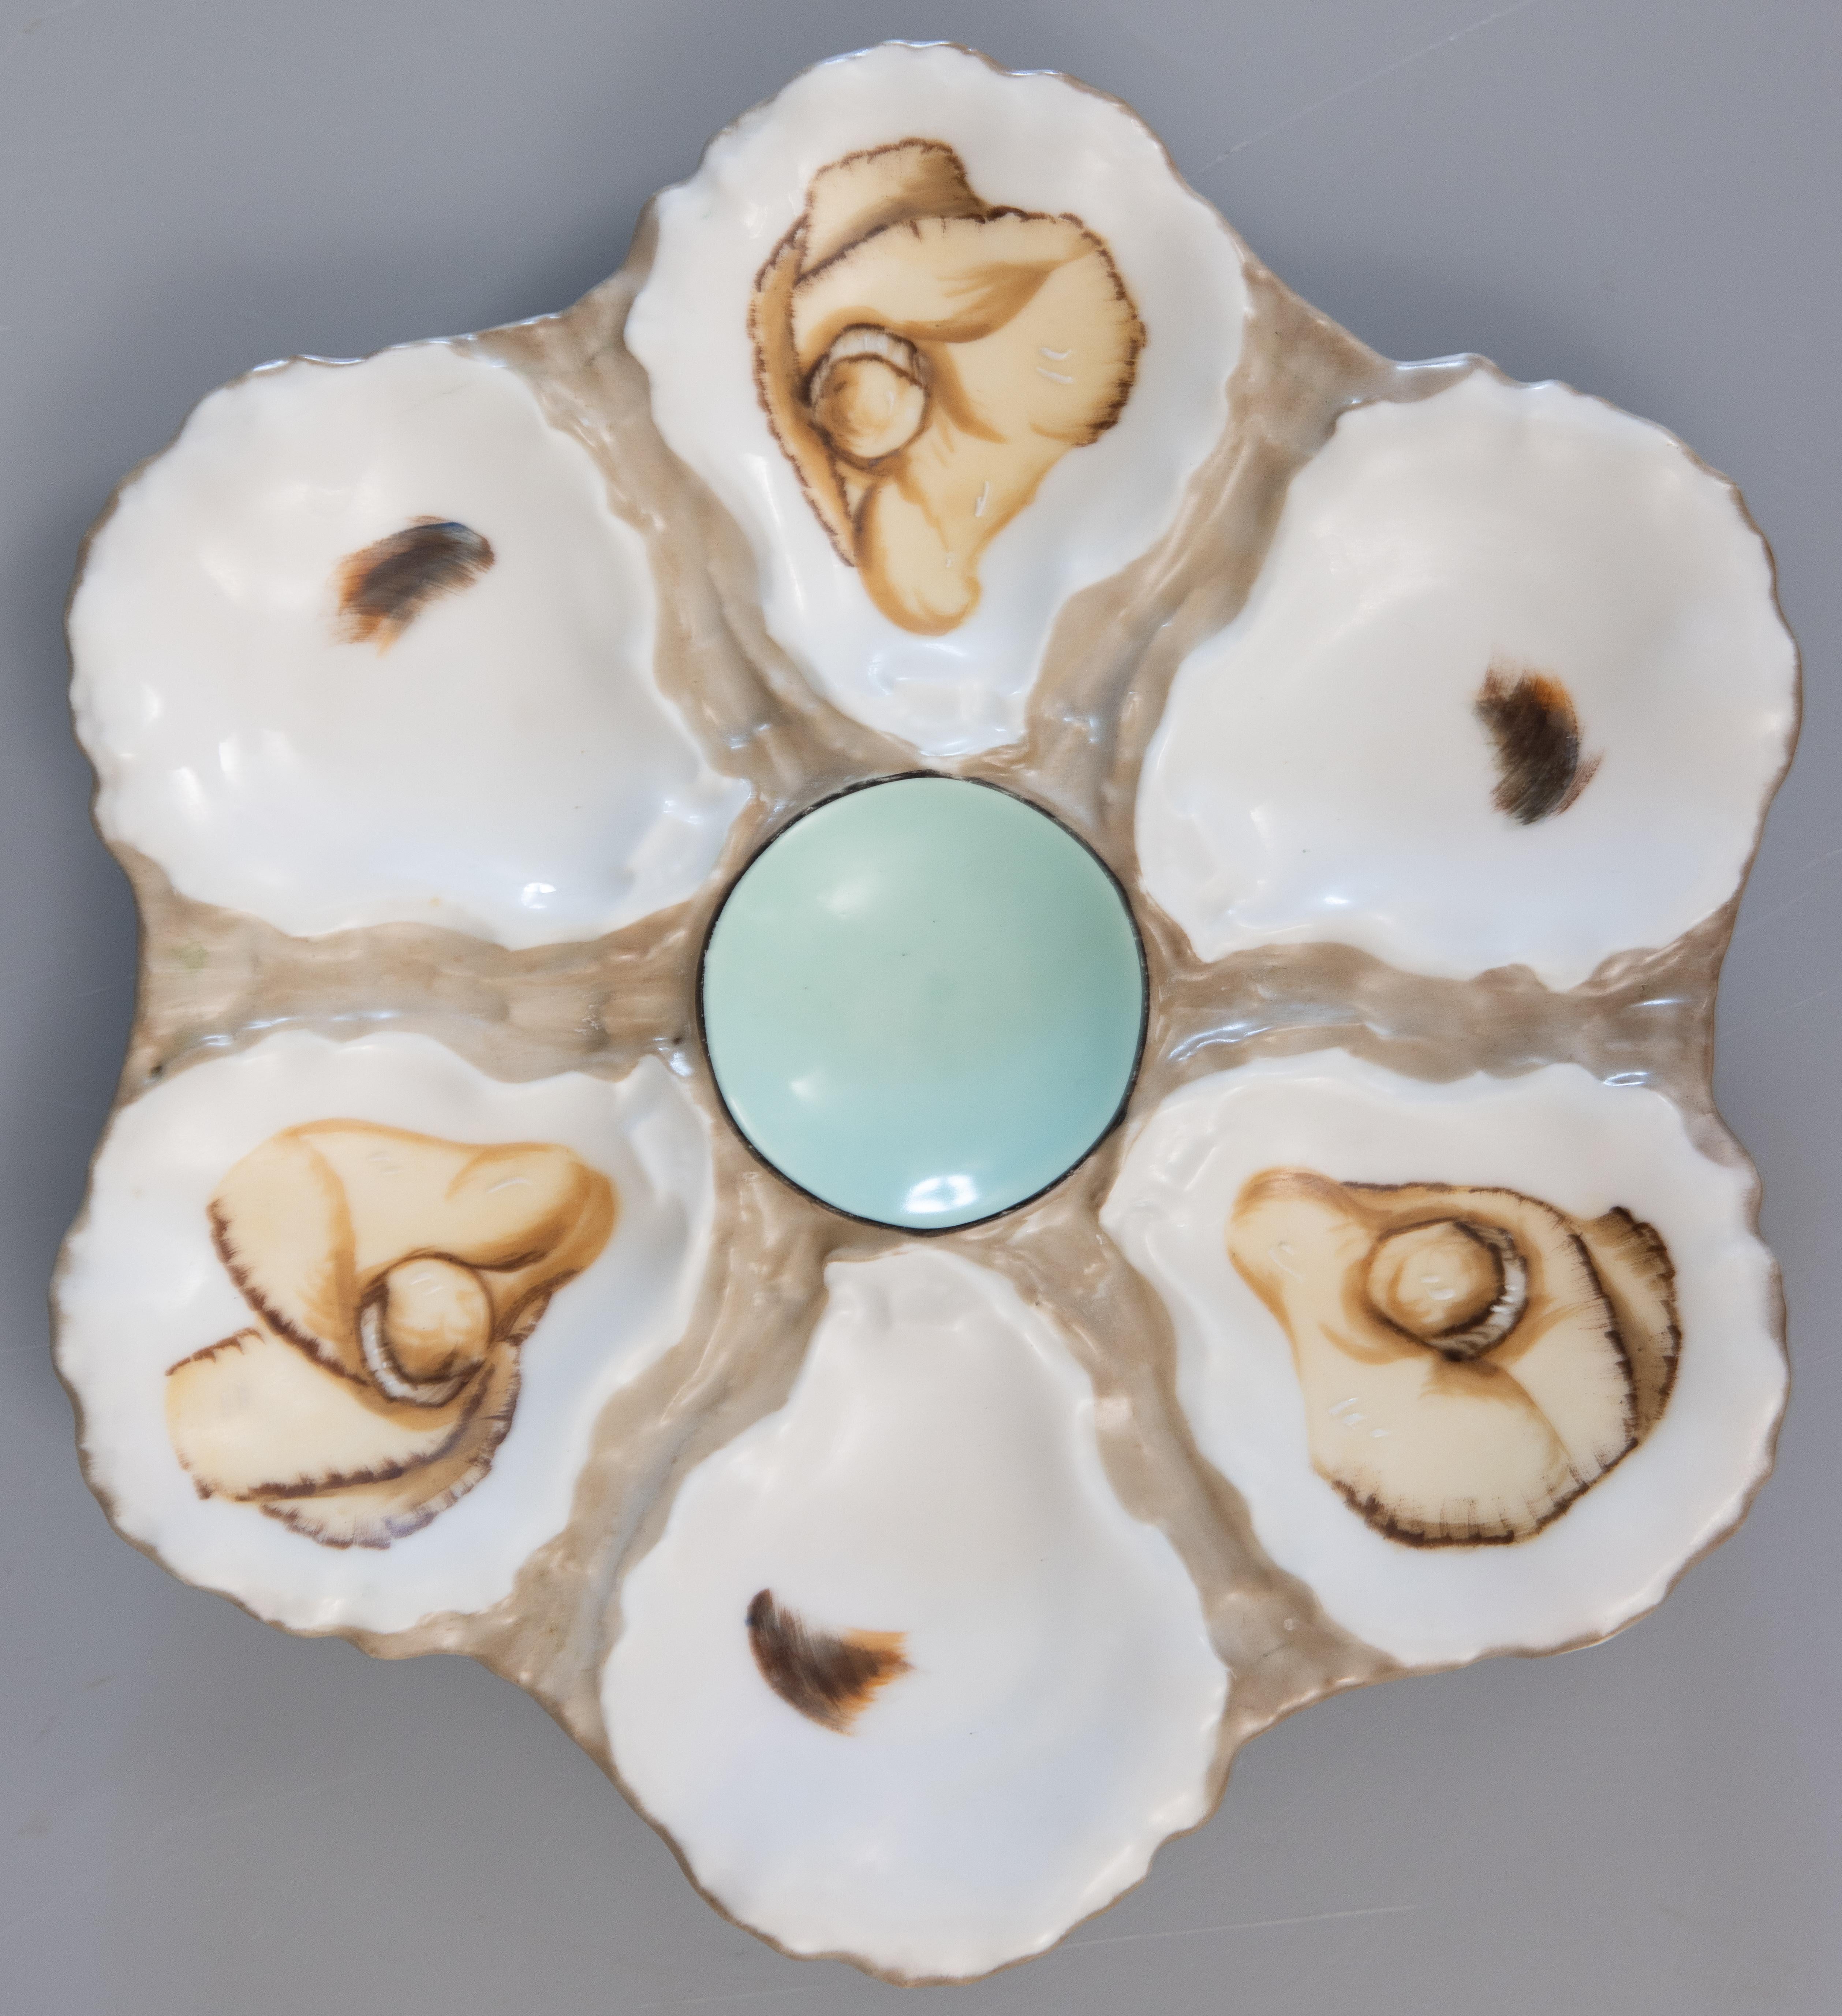 A gorgeous vintage French majolica porcelain oyster plate. This fine quality oyster plate has six wells with hand painted shell decorations and a soft turquoise center. It displays beautifully and would also be perfect for serving.

 